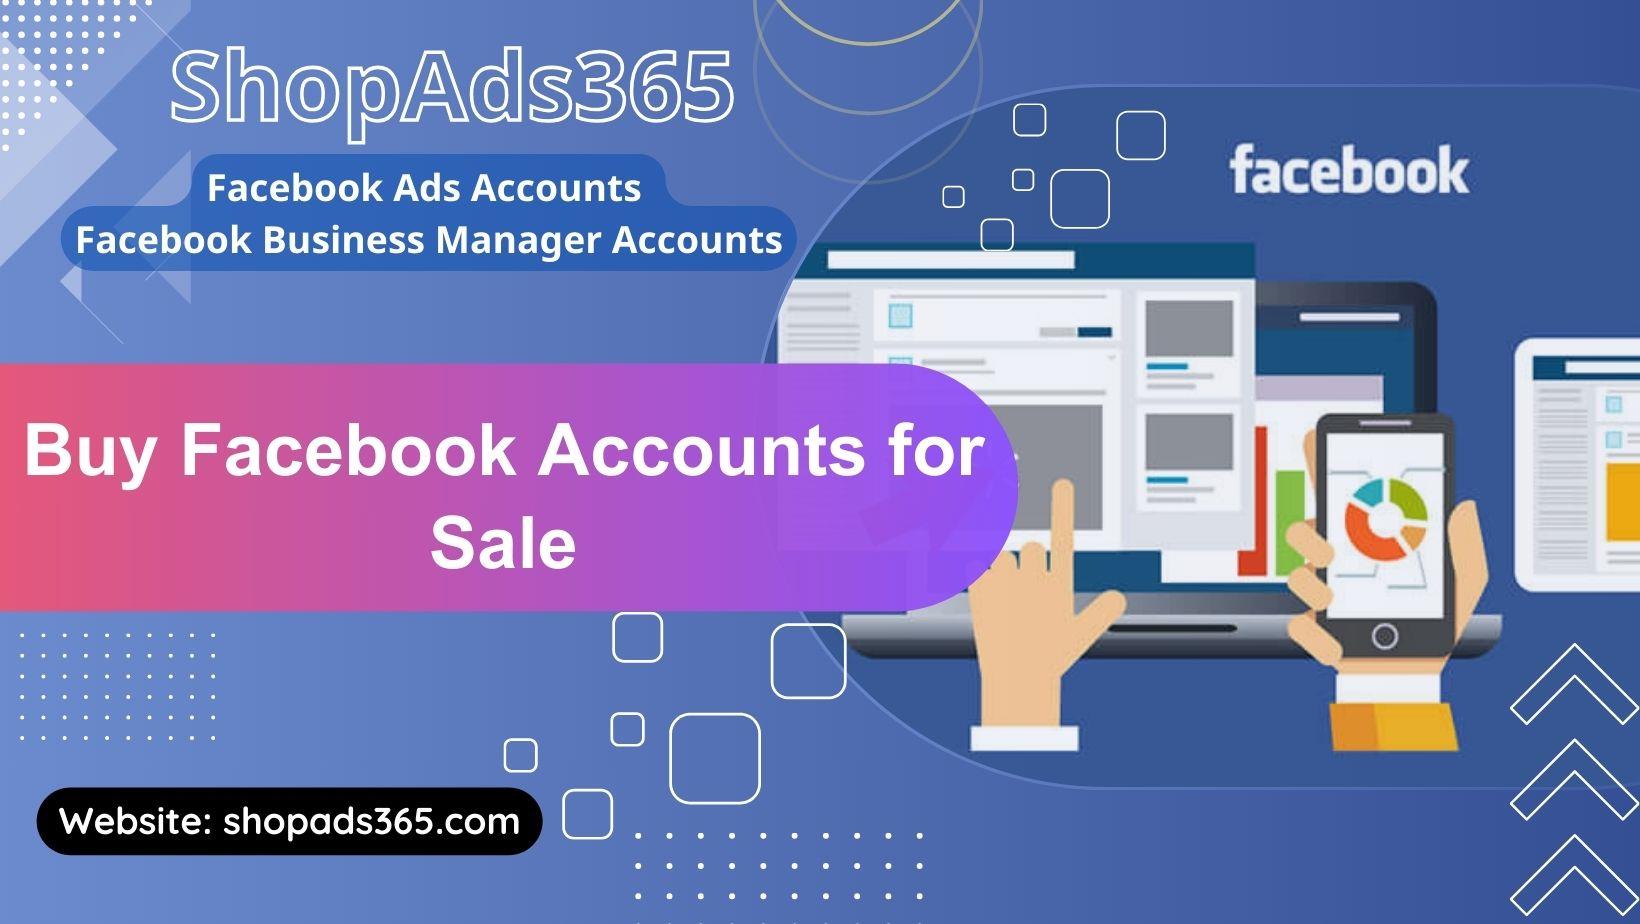 Buy Facebook accounts for sell - Age - Cheap